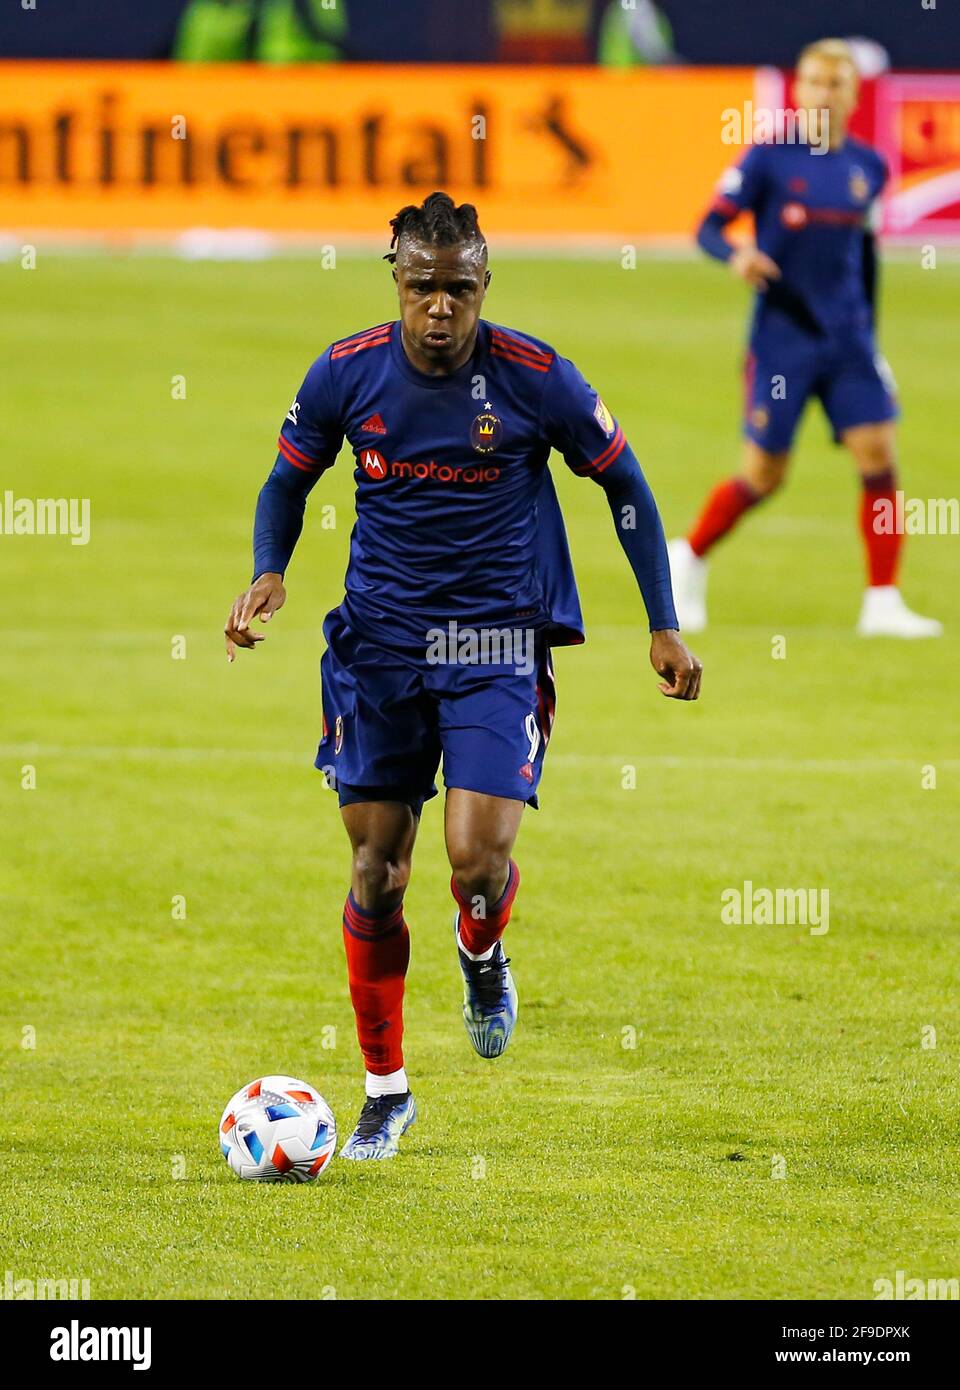 Chicago, USA, 17 April 2021. Major League Soccer (MLS) Chicago Fire FC forward Chinonso Offor (9) handles the ball against the New England Revolution at Soldier Field in Chicago, IL, USA. Match ended 2-2. Credit: Tony Gadomski / All Sport Imaging / Alamy Live News Stock Photo